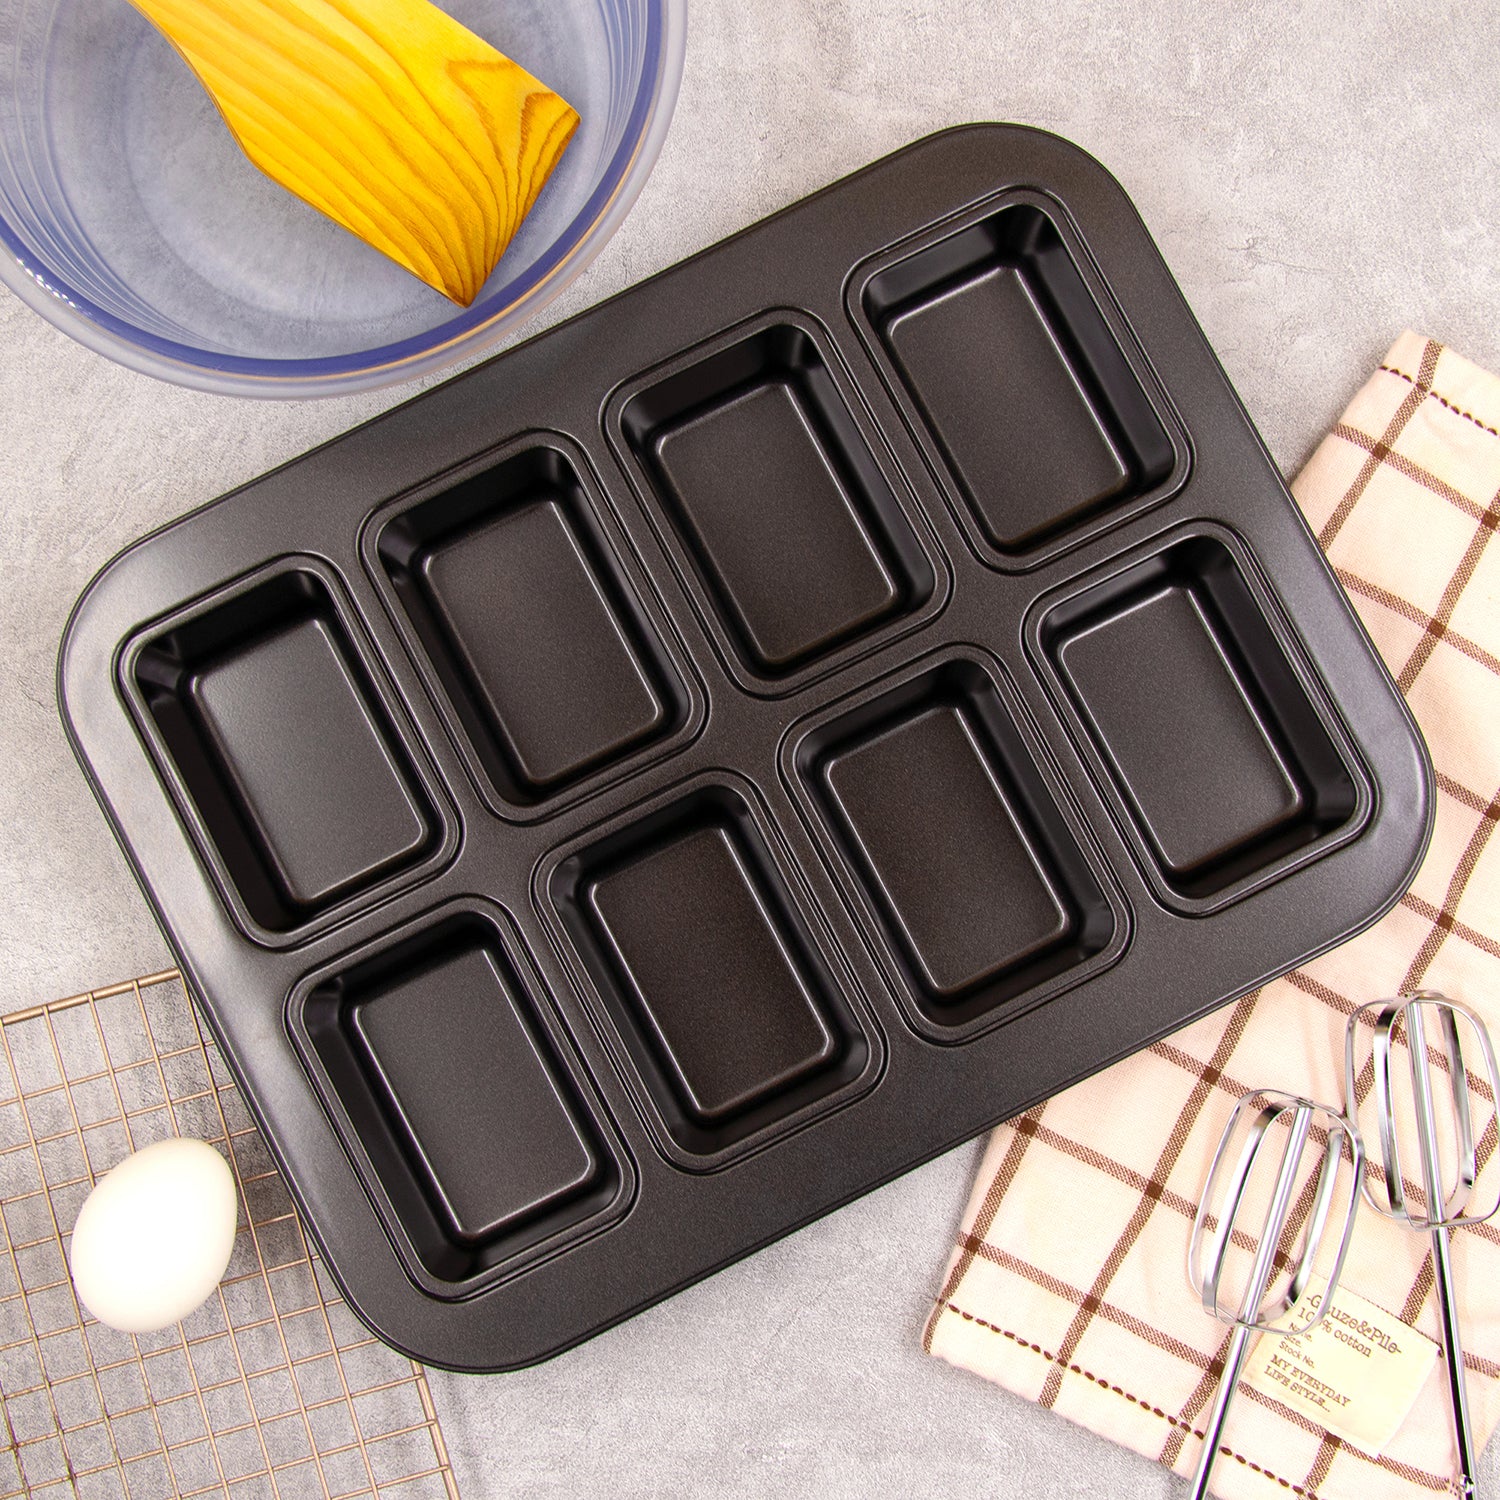 How to Bake in Mini Loaf Pans